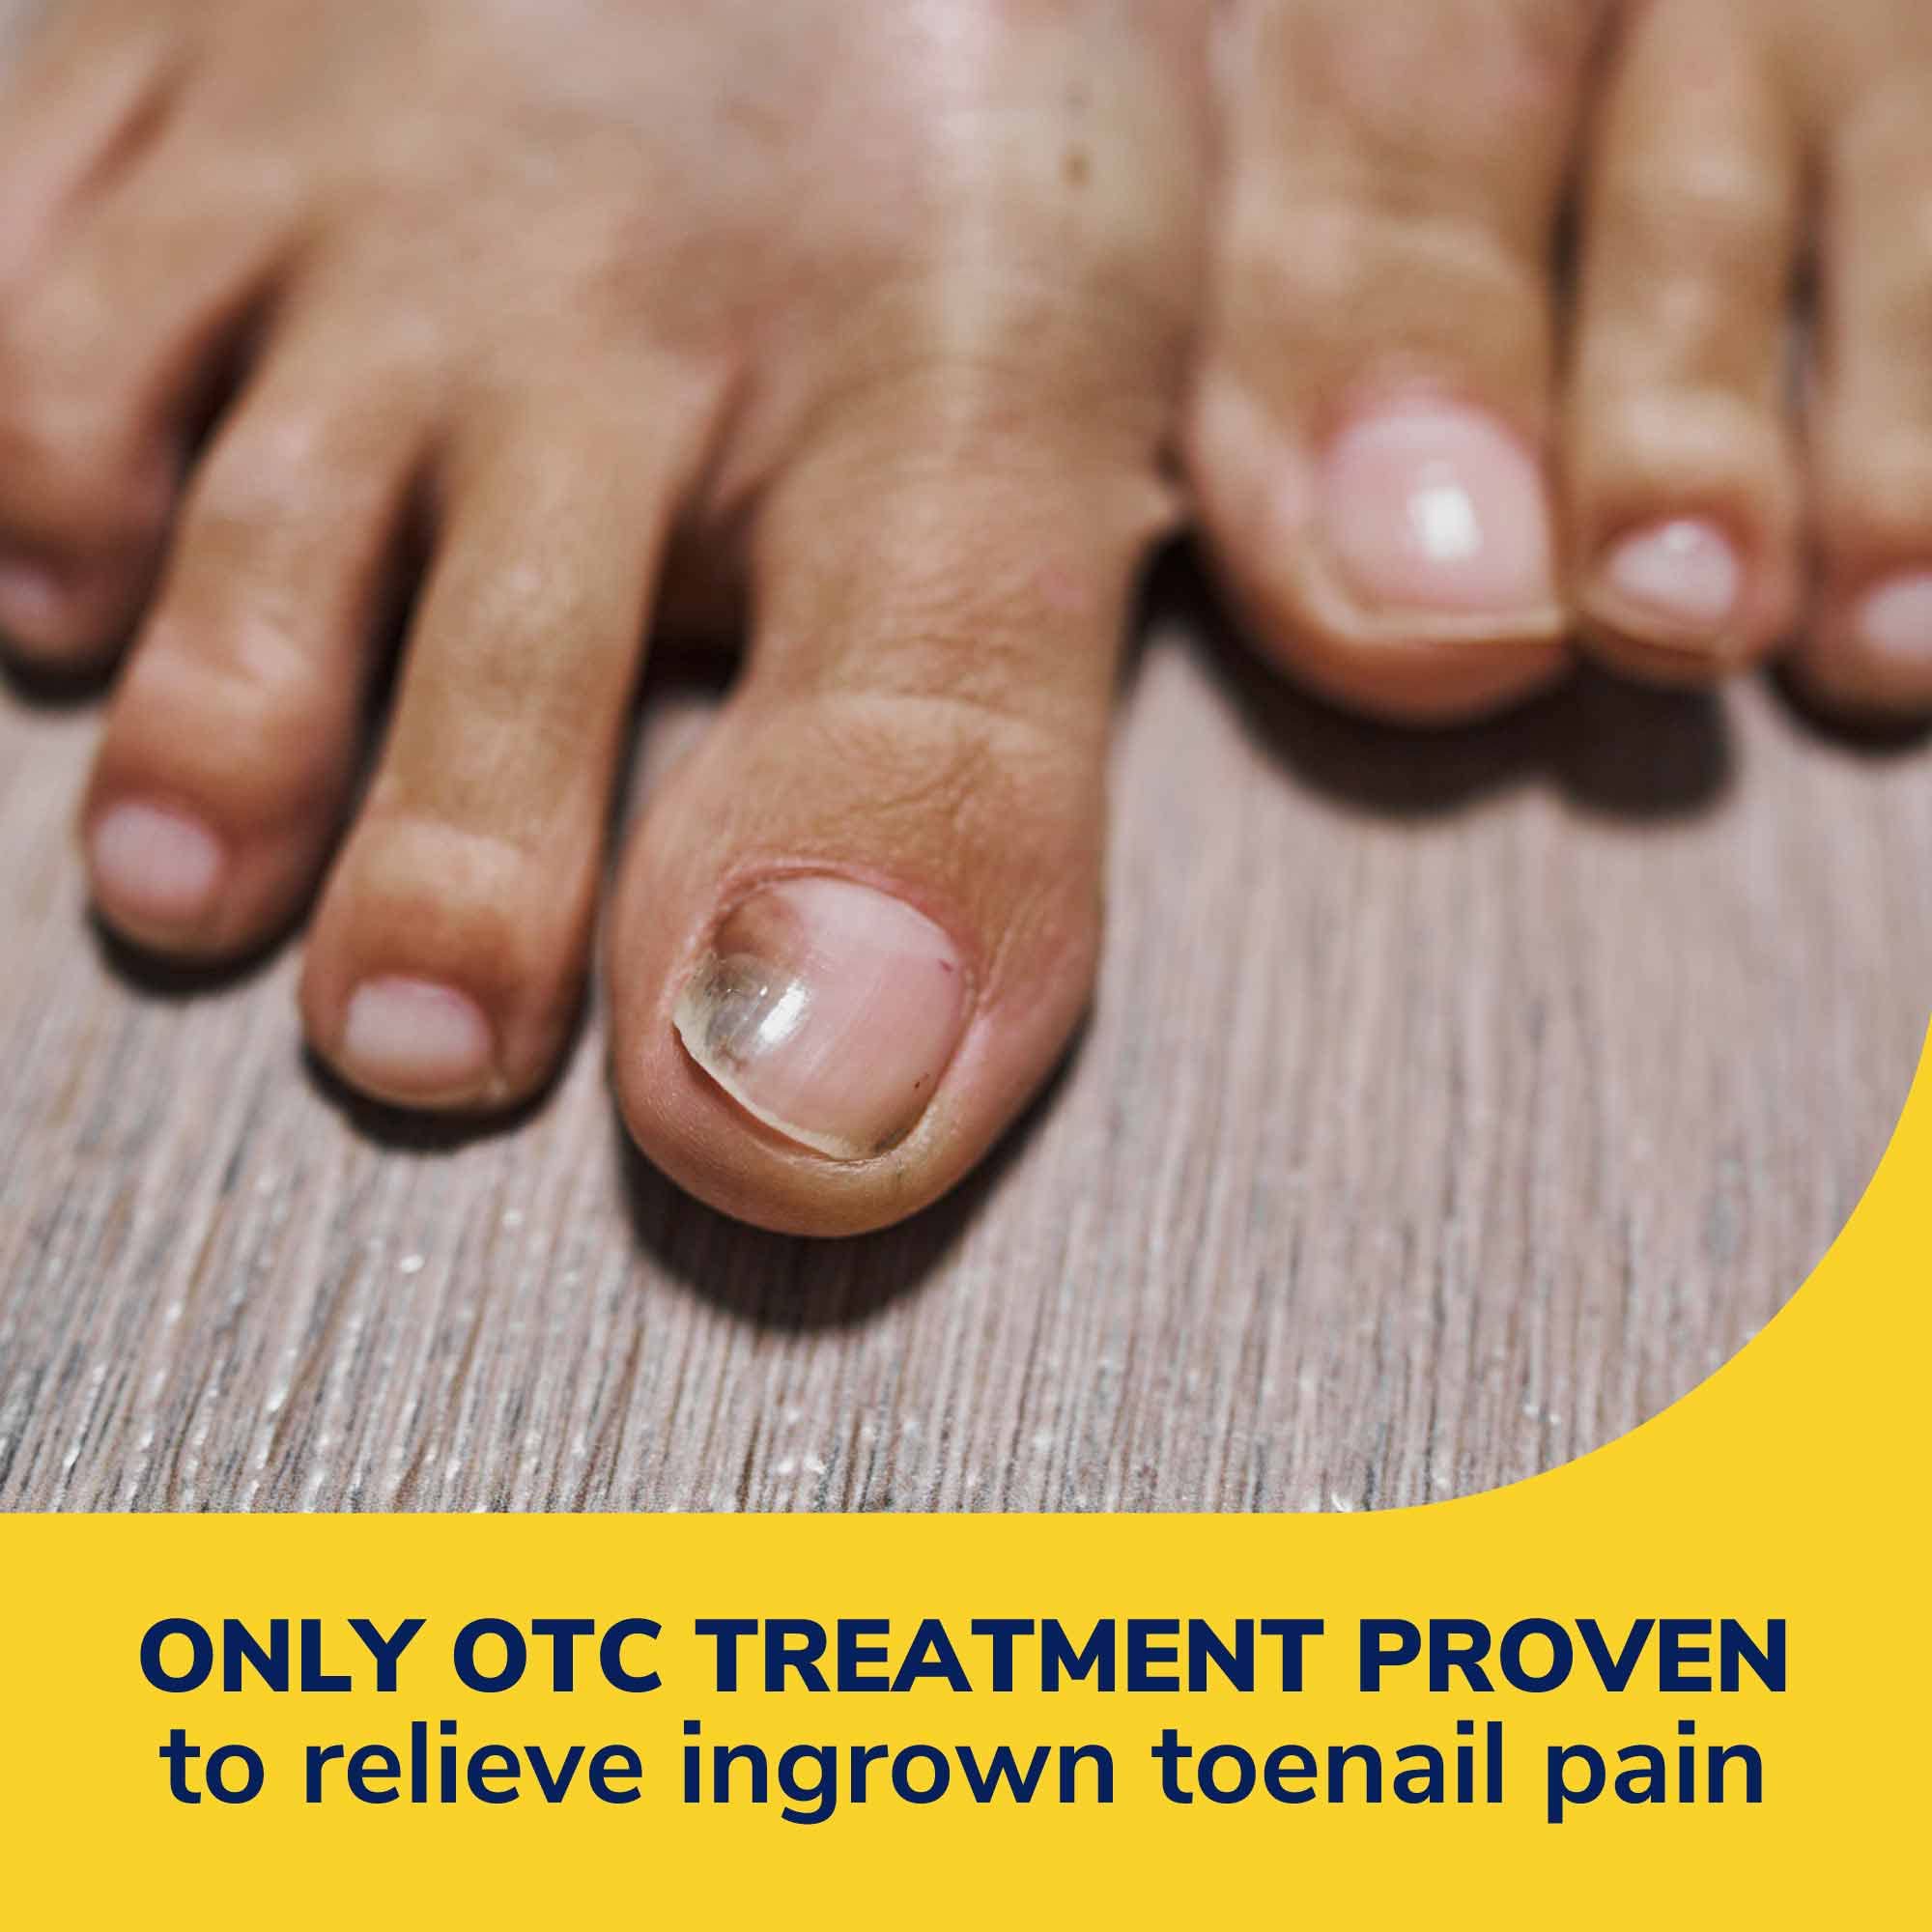 Dr. Scholl's Ingrown Toenail Pain Reliever, 0.3oz // Medicated Gel Softens Nails for Easy Trimming and Foam Ring and Bandage Protect the Affected Area